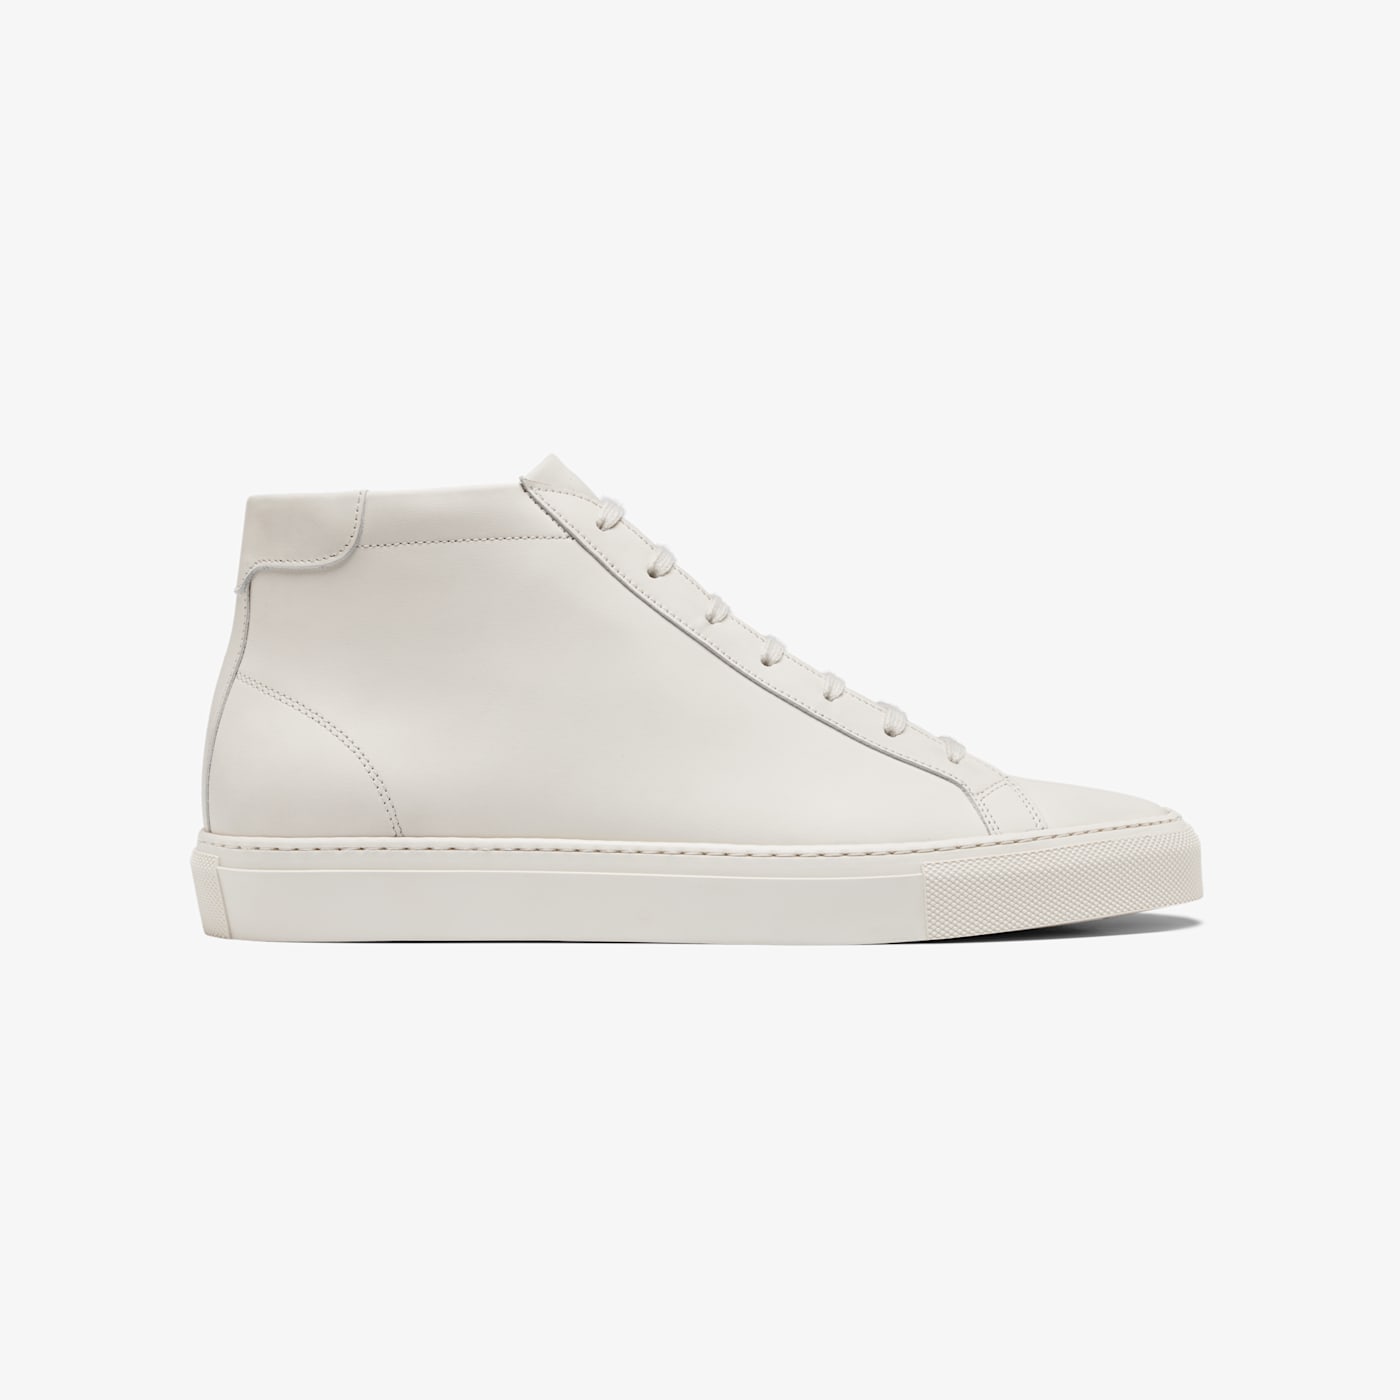 SUITSUPPLY OFF-WHITE HIGH TOP SNEAKER